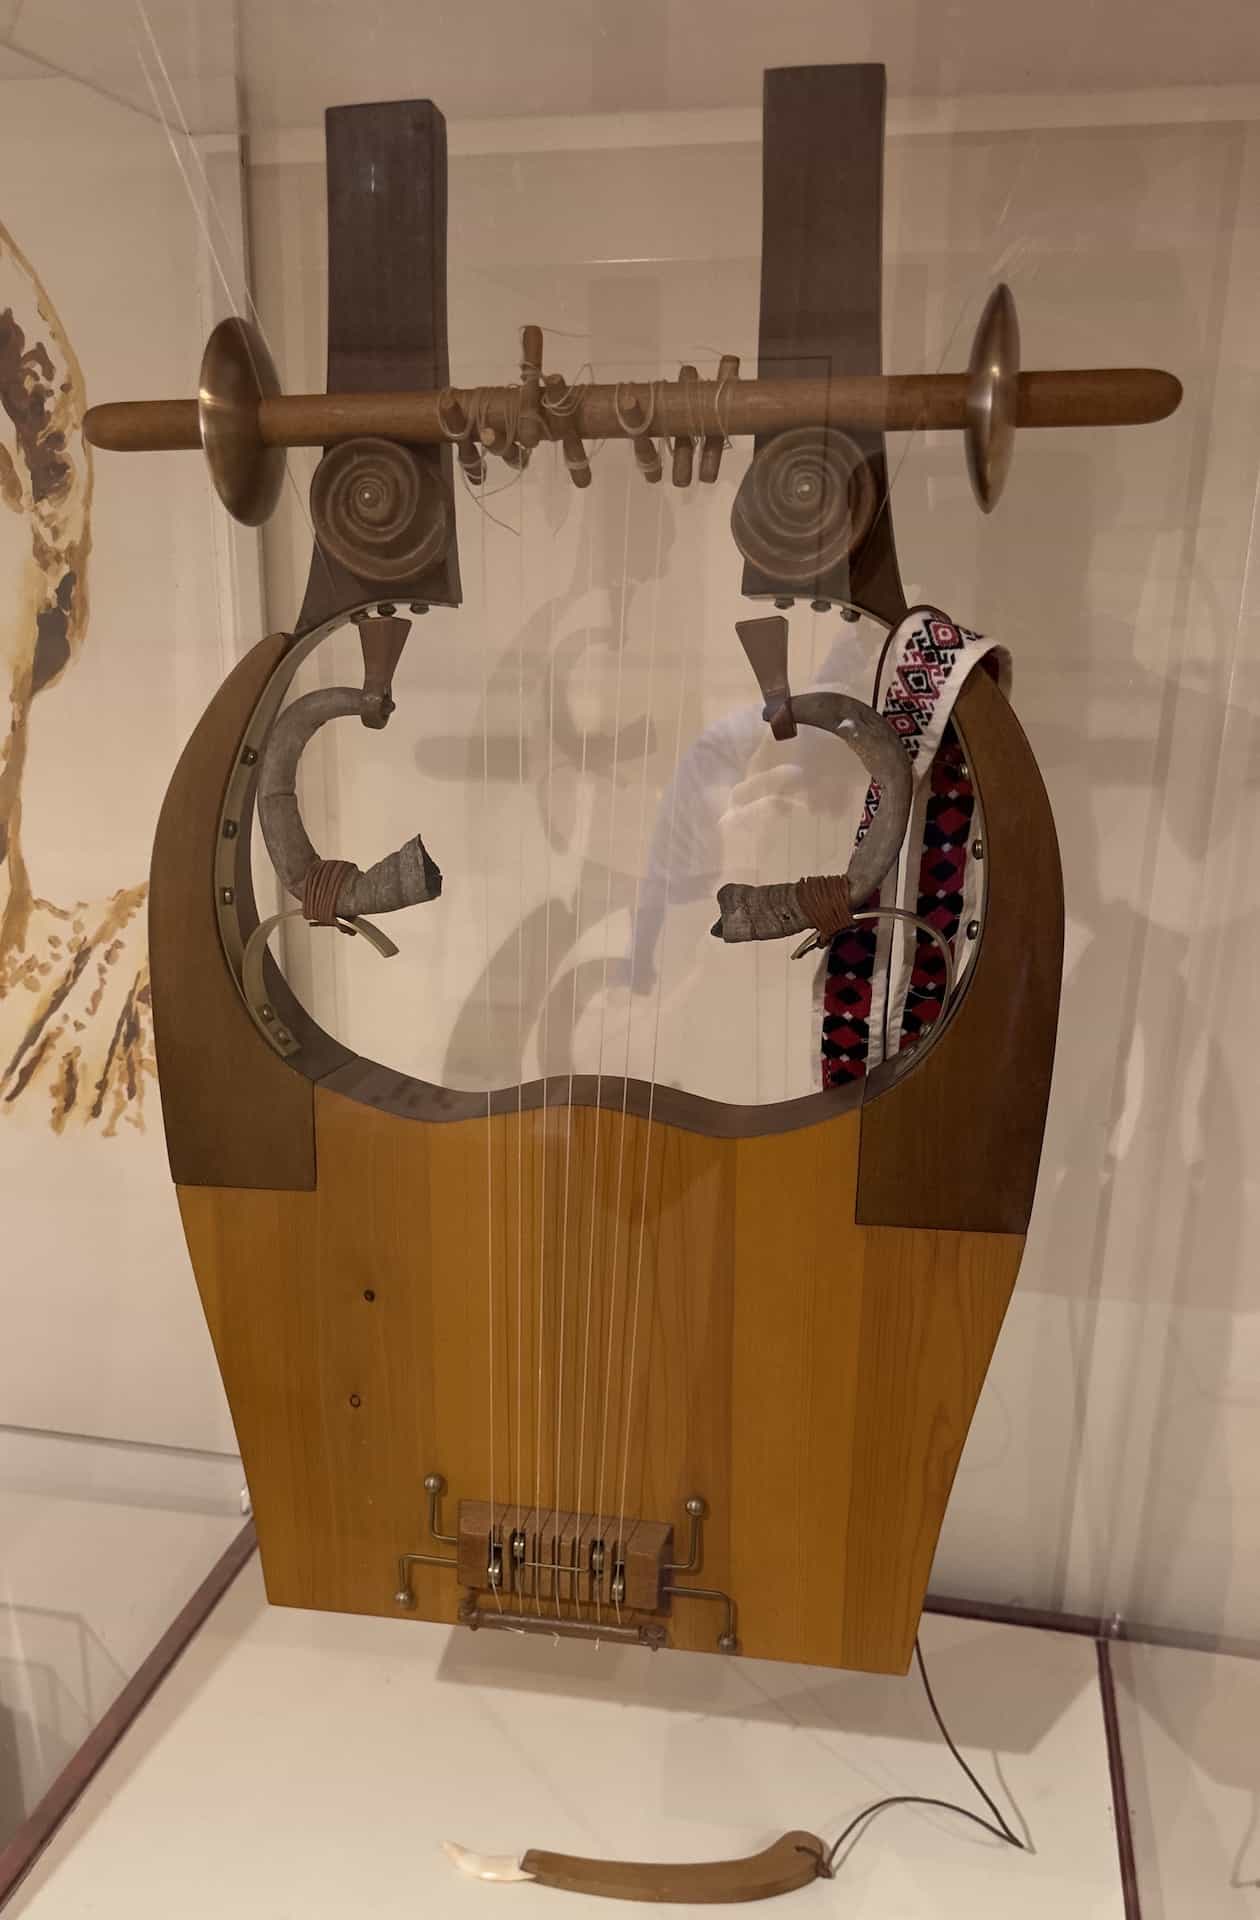 Kithara (guitar of Apollo) at the Museum of Ancient Greek Technology in Athens, Greece